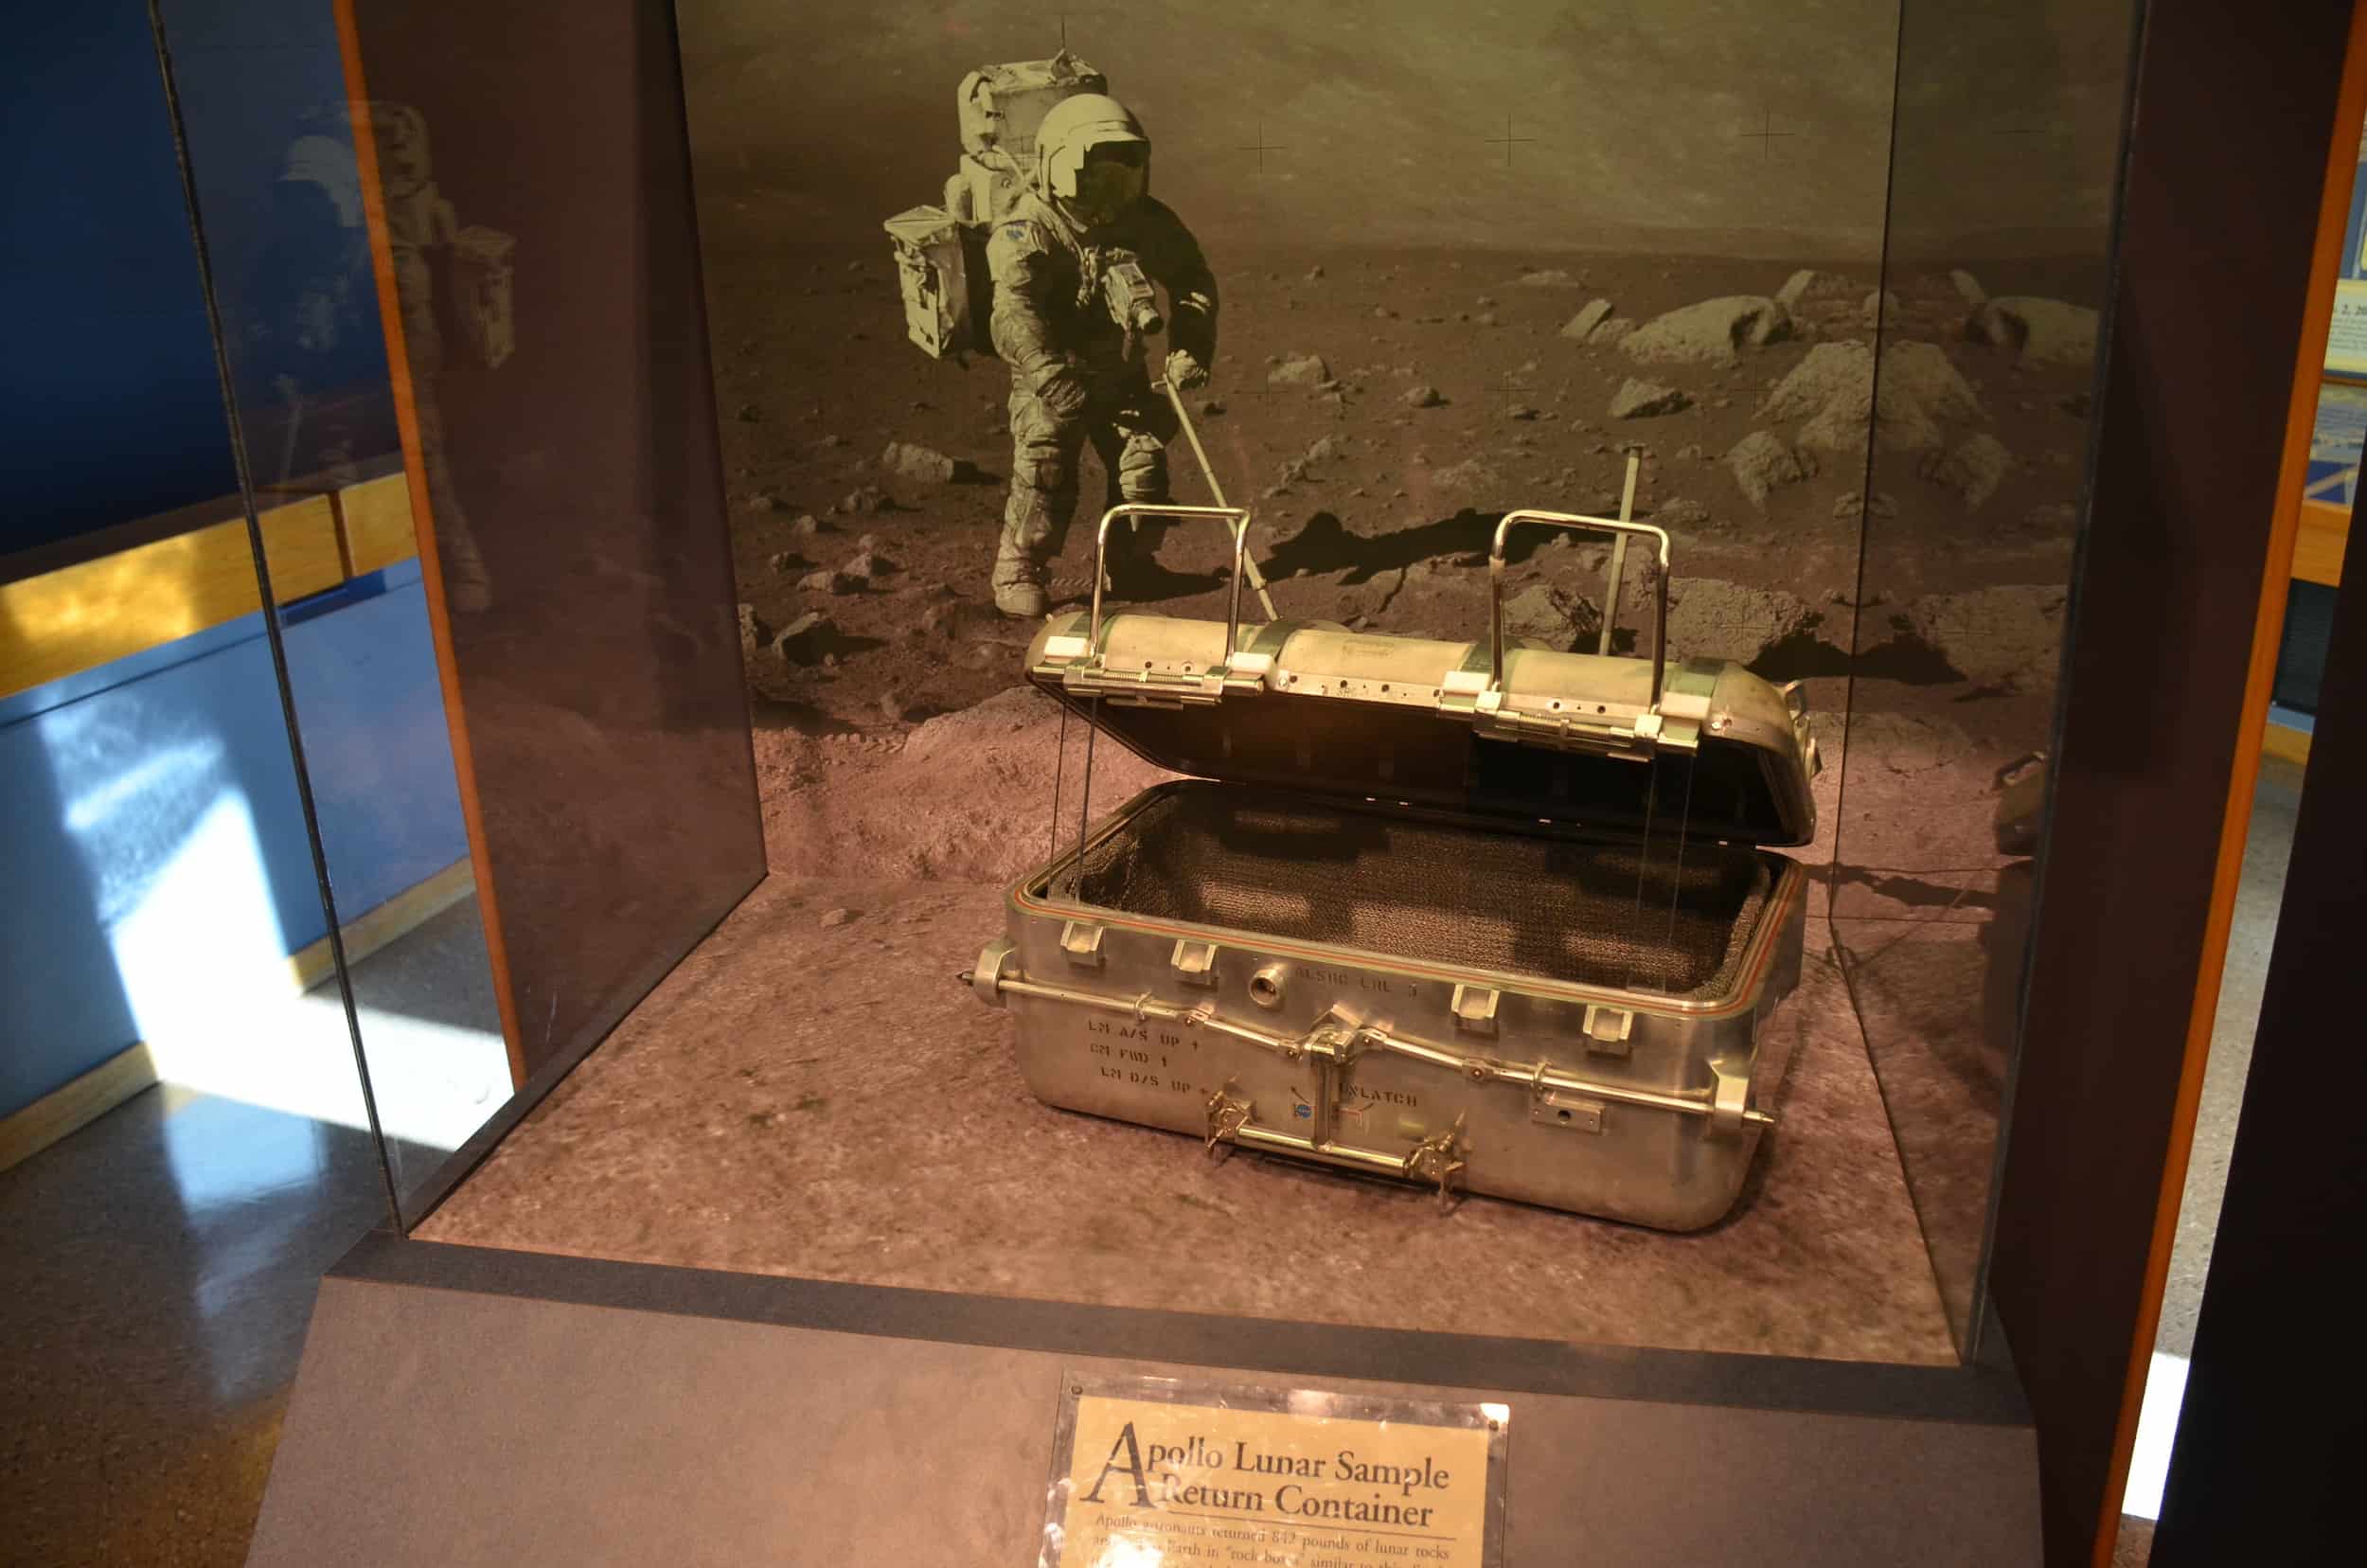 Apollo lunar sample return container at the New Mexico Museum of Space History in Alamogordo, New Mexico